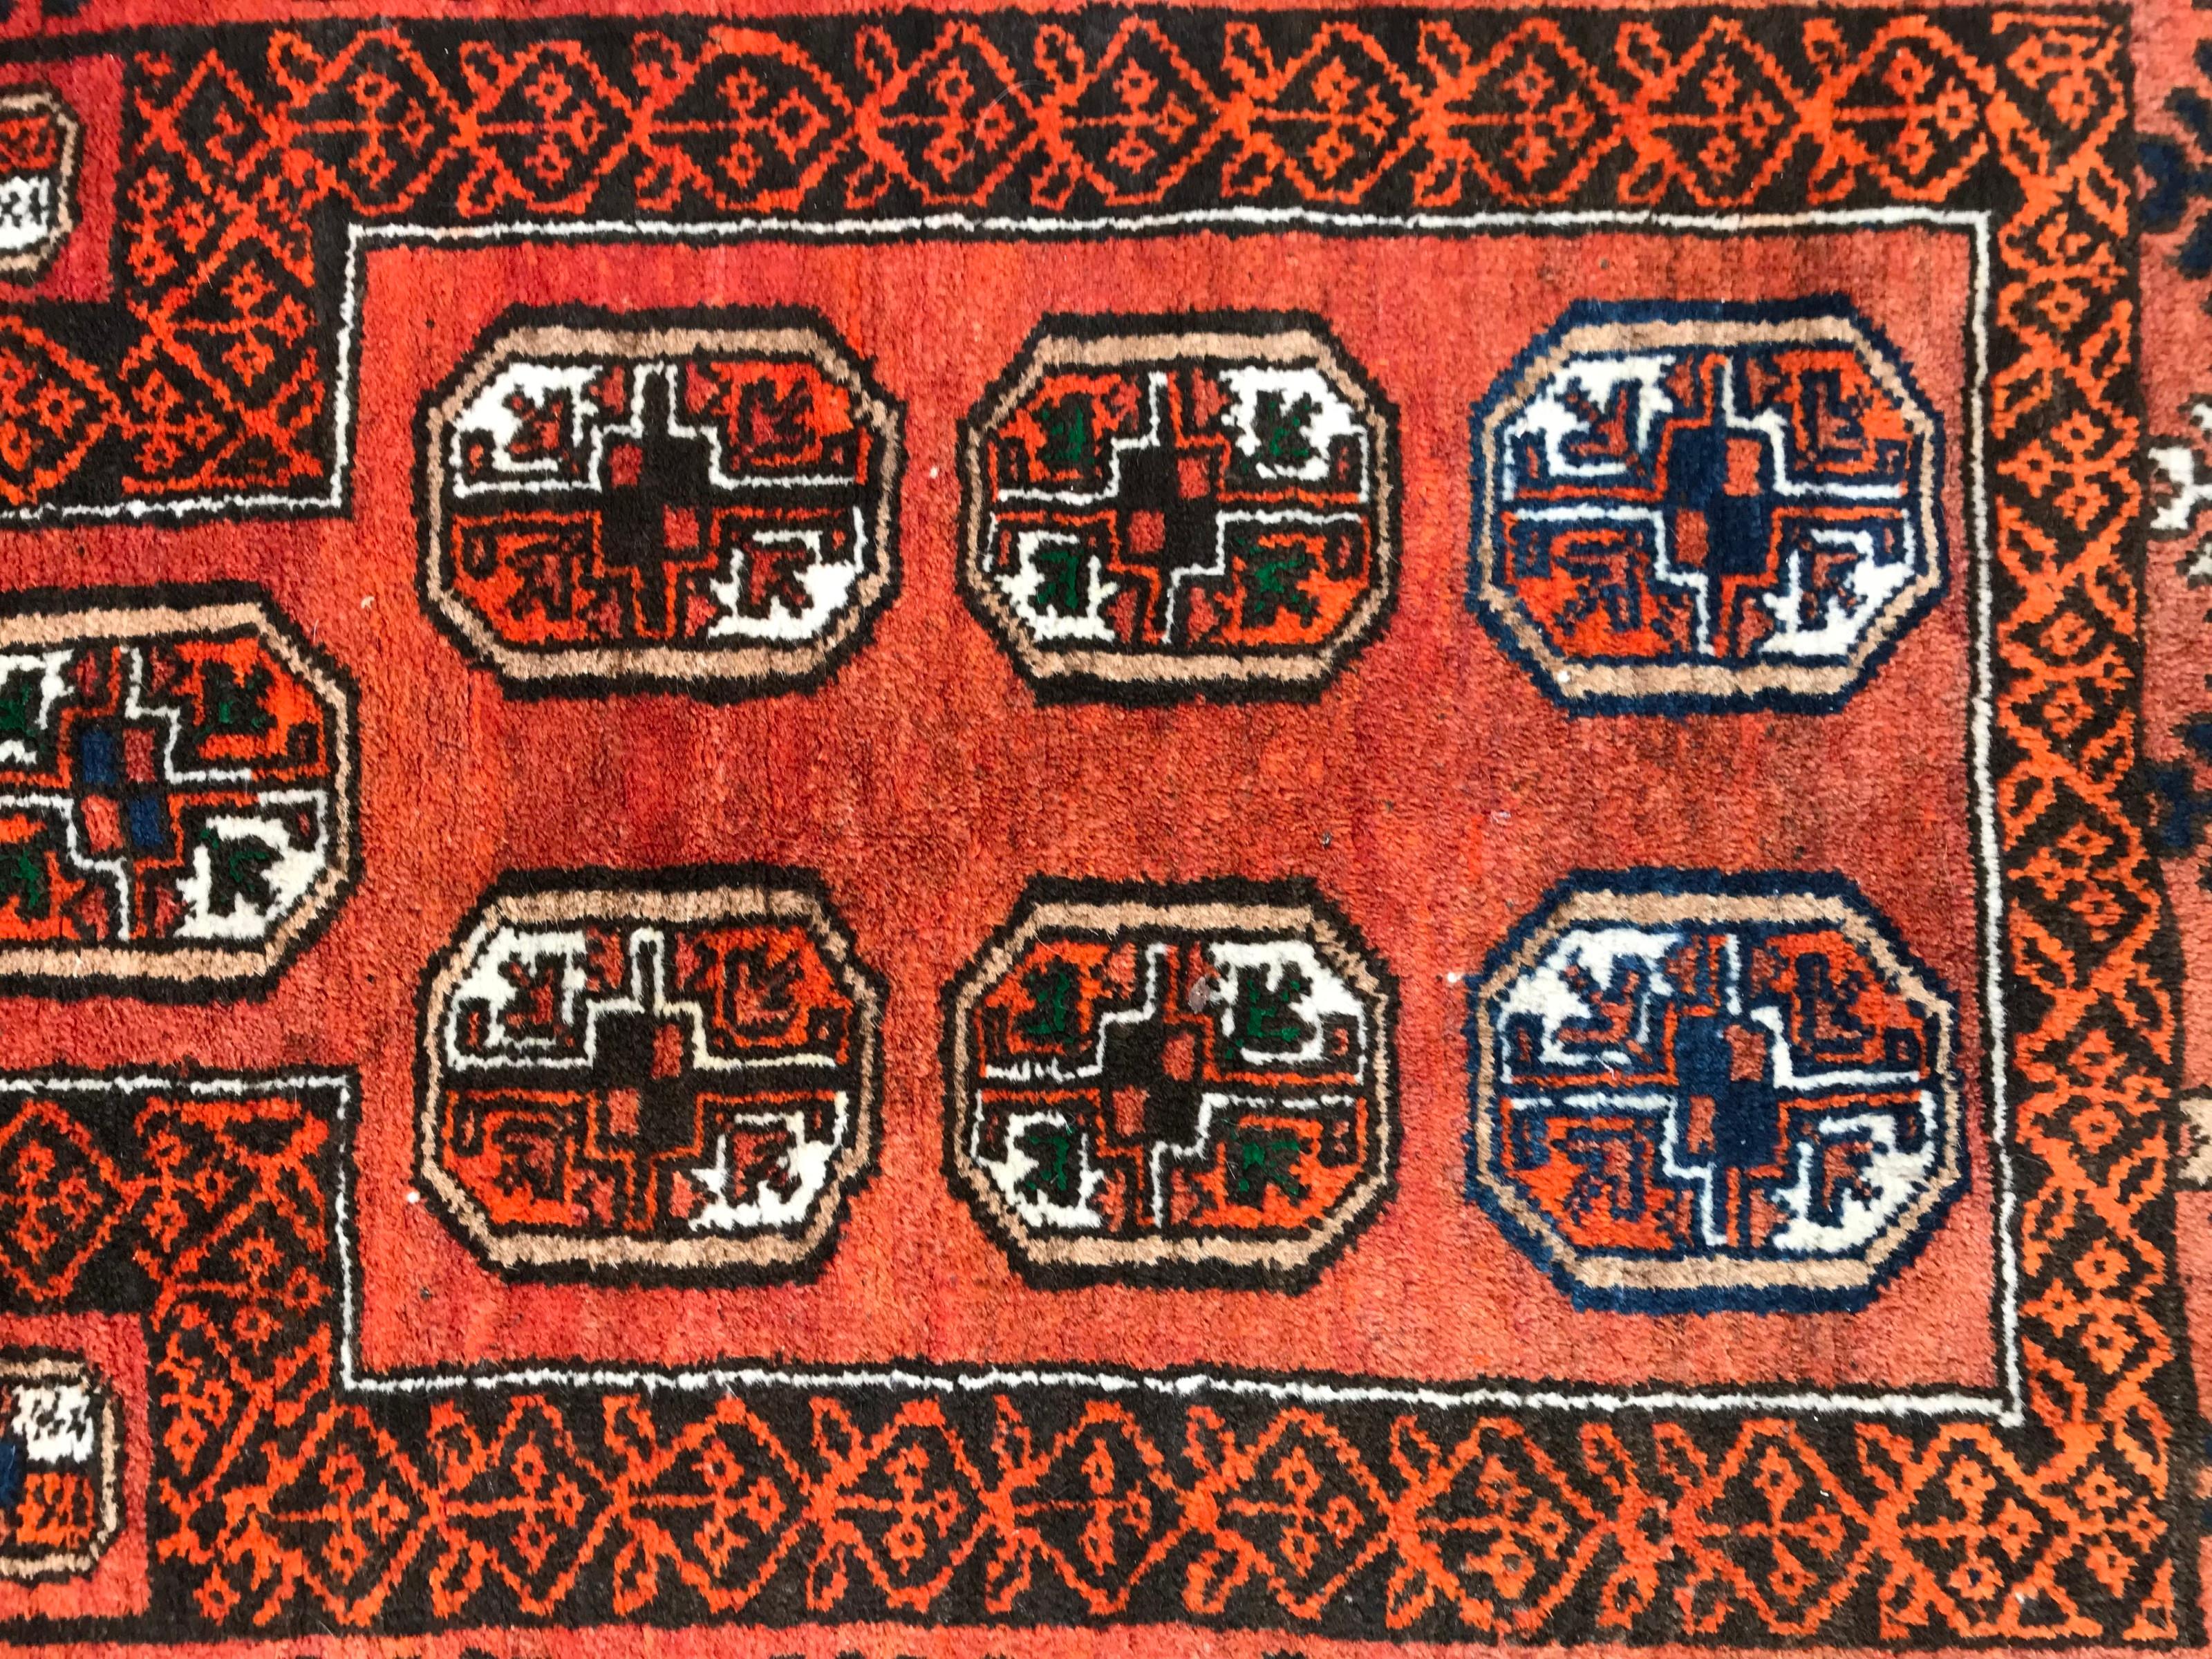 Mid-20th century Afghan rug, with beautiful prayer design and a red field color, wool velvet on wool foundations.

✨✨✨
